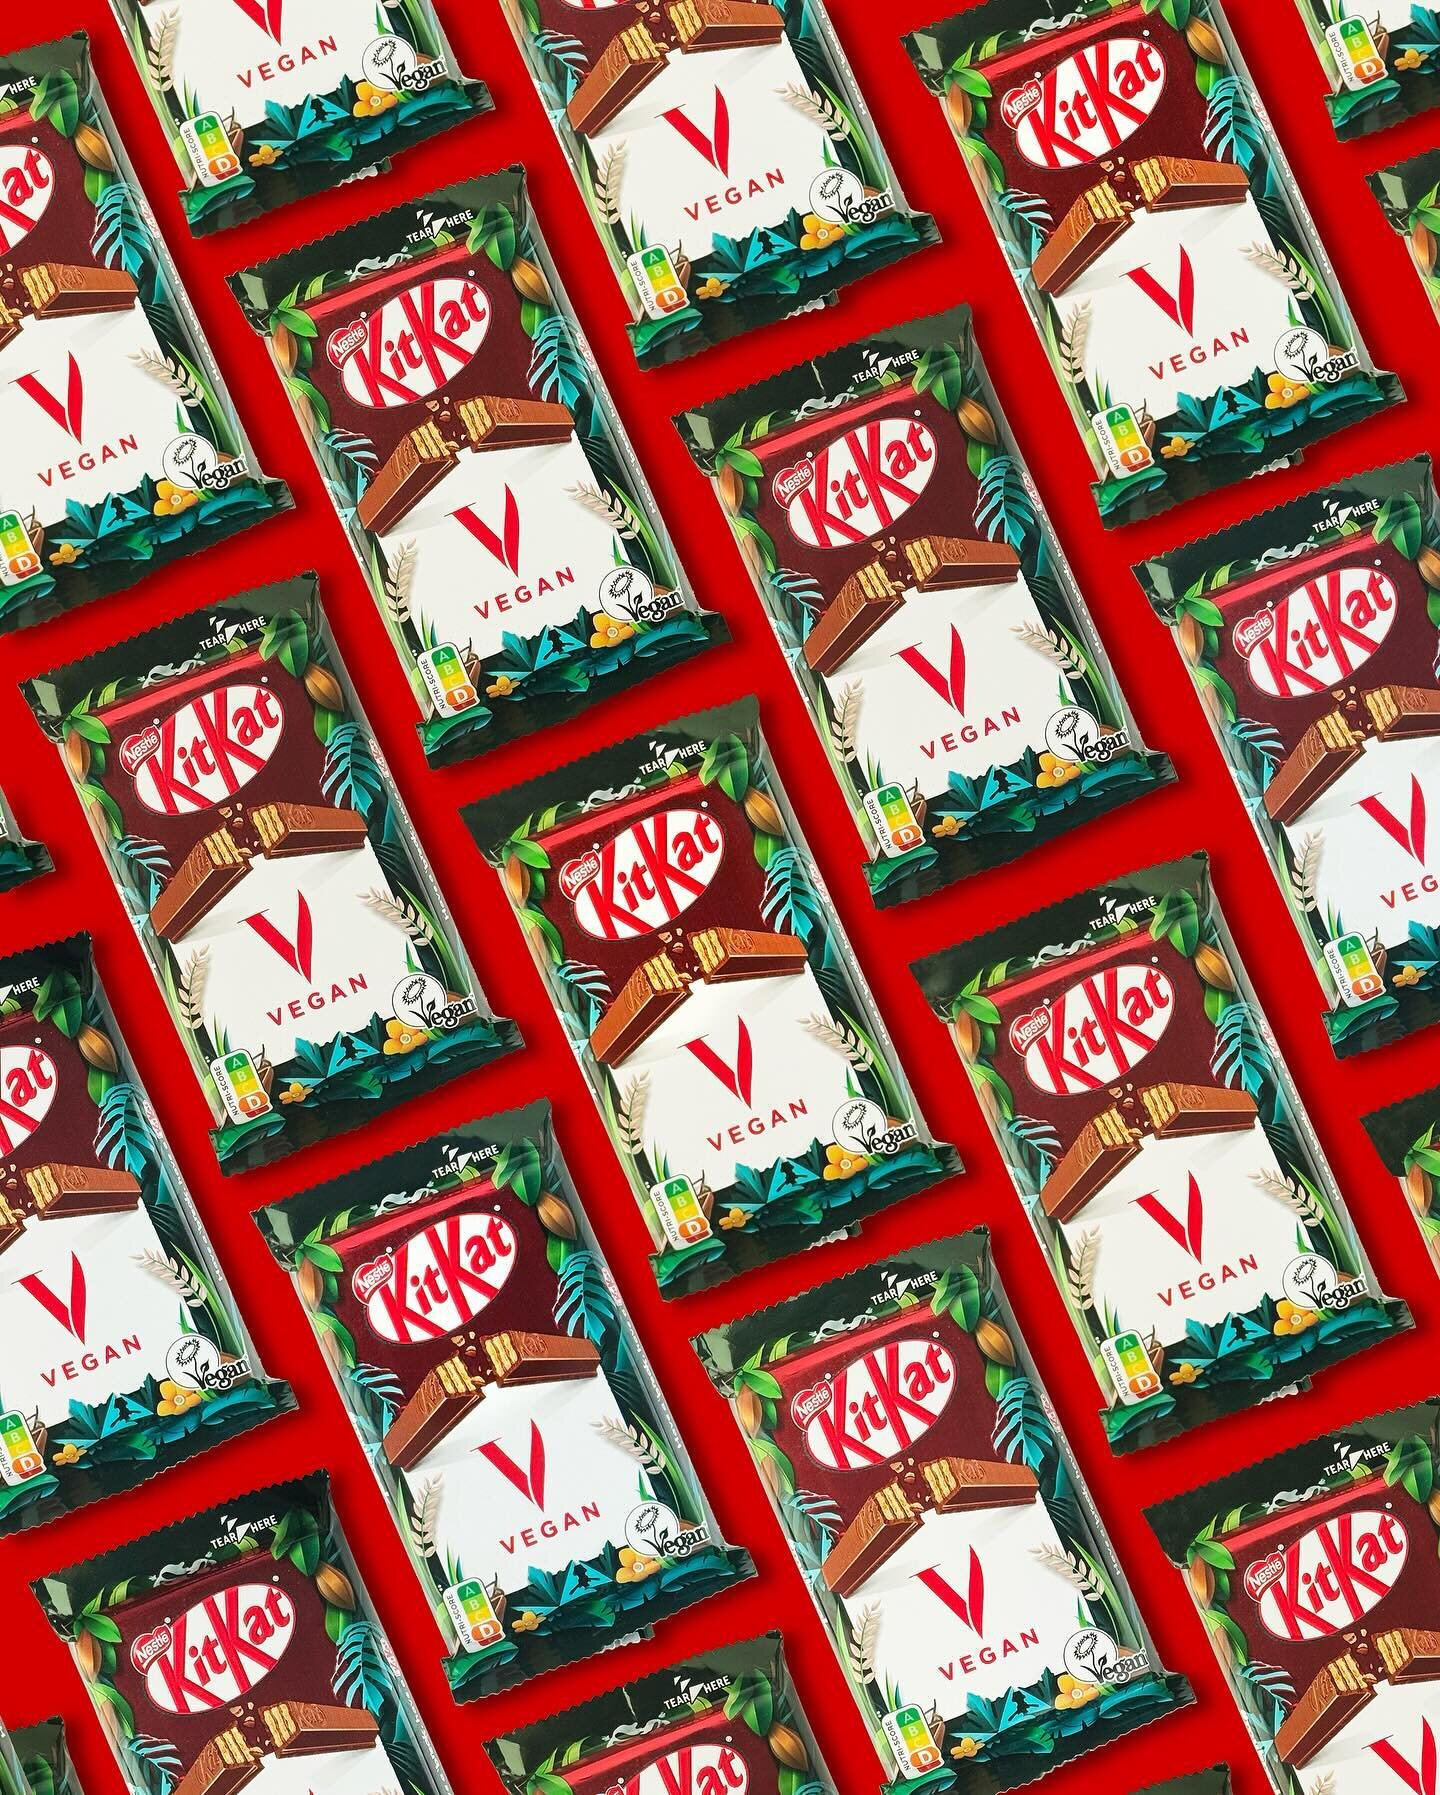 We&rsquo;ve been waiting a long time, but here they are! Vegan KitKats have arrived. Rice-milk based vegan chocolate and crispy wafers just like you remember, with a slightly different taste. More of a dark chocolate than a milk chocolate, but still 